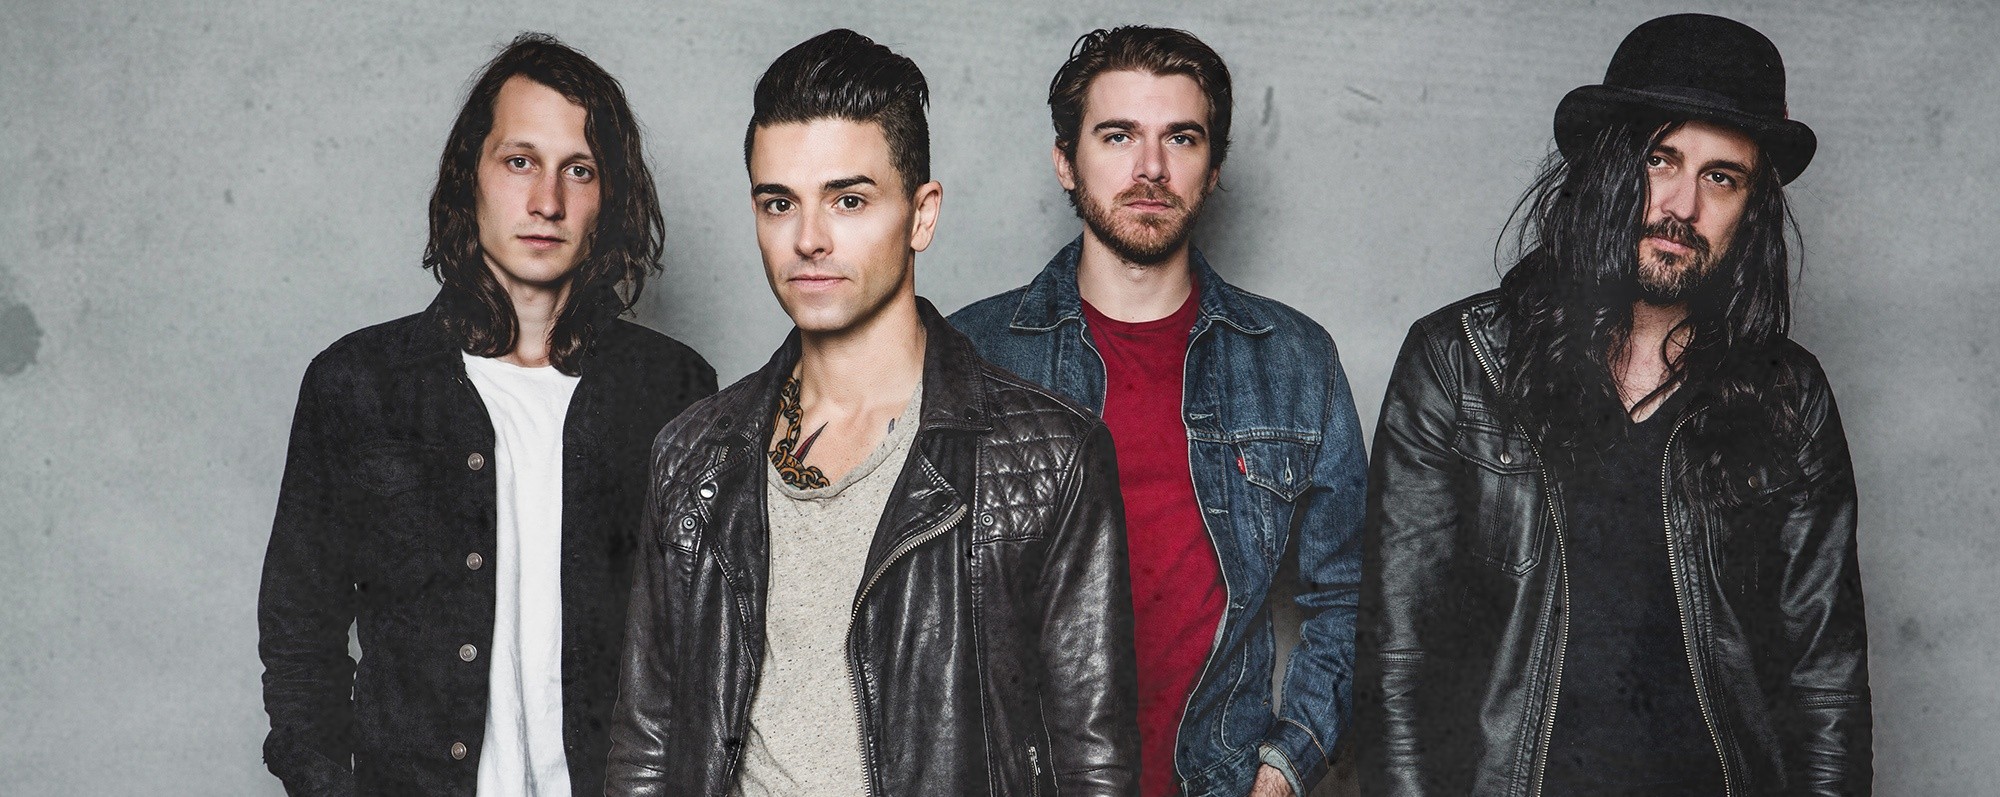 Dashboard Confessional - Live in Singapore!